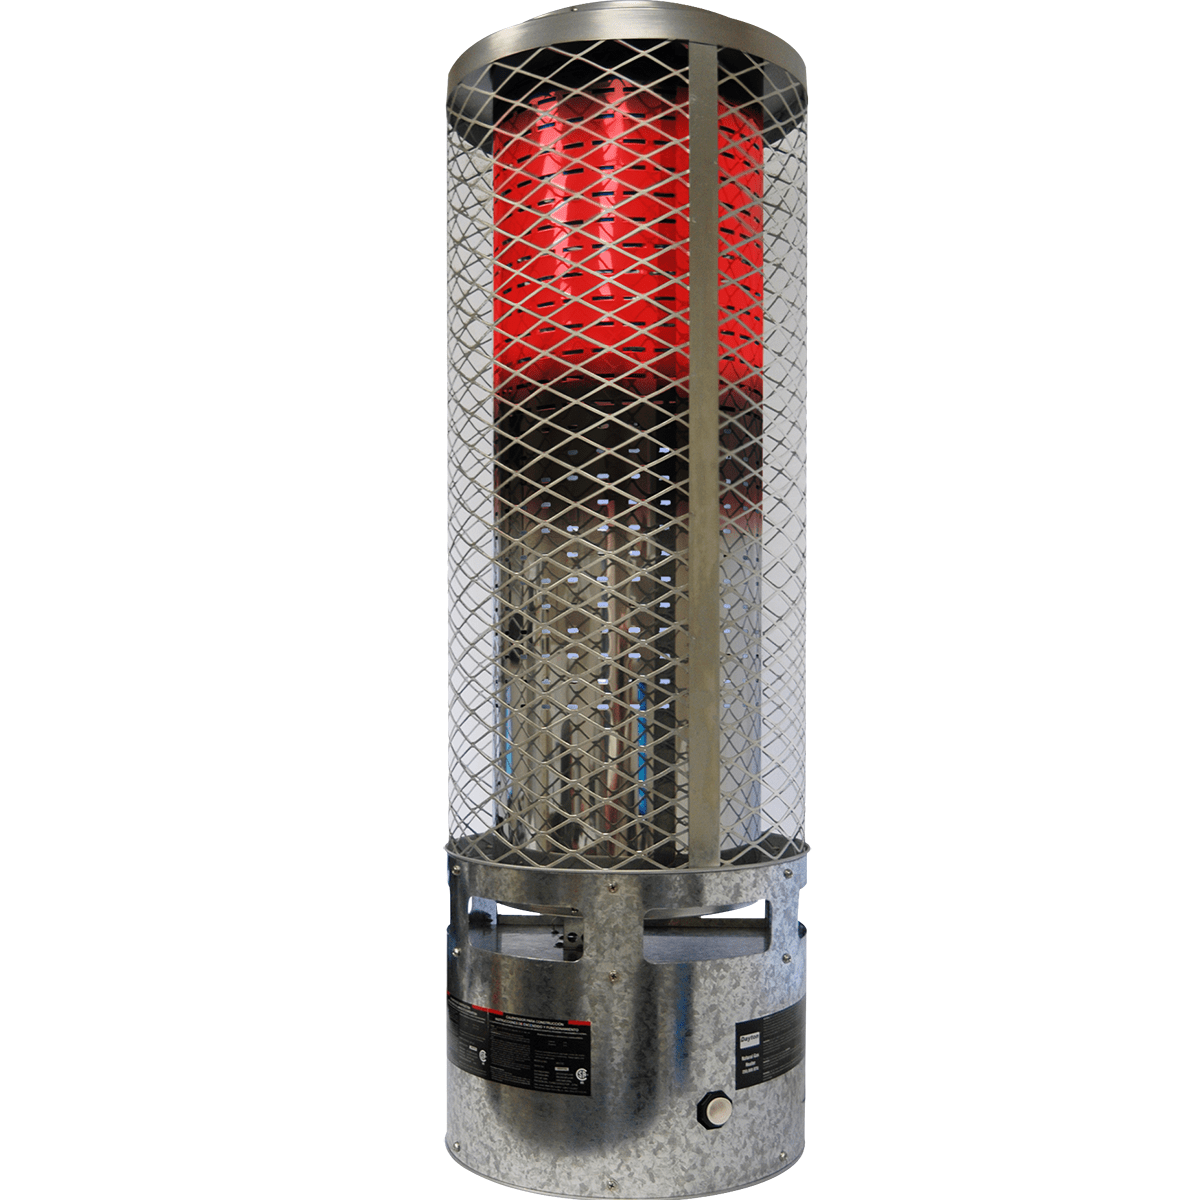 Dyna-Glo Delux Natural Gas Radiant Heater - 250,000 BTU